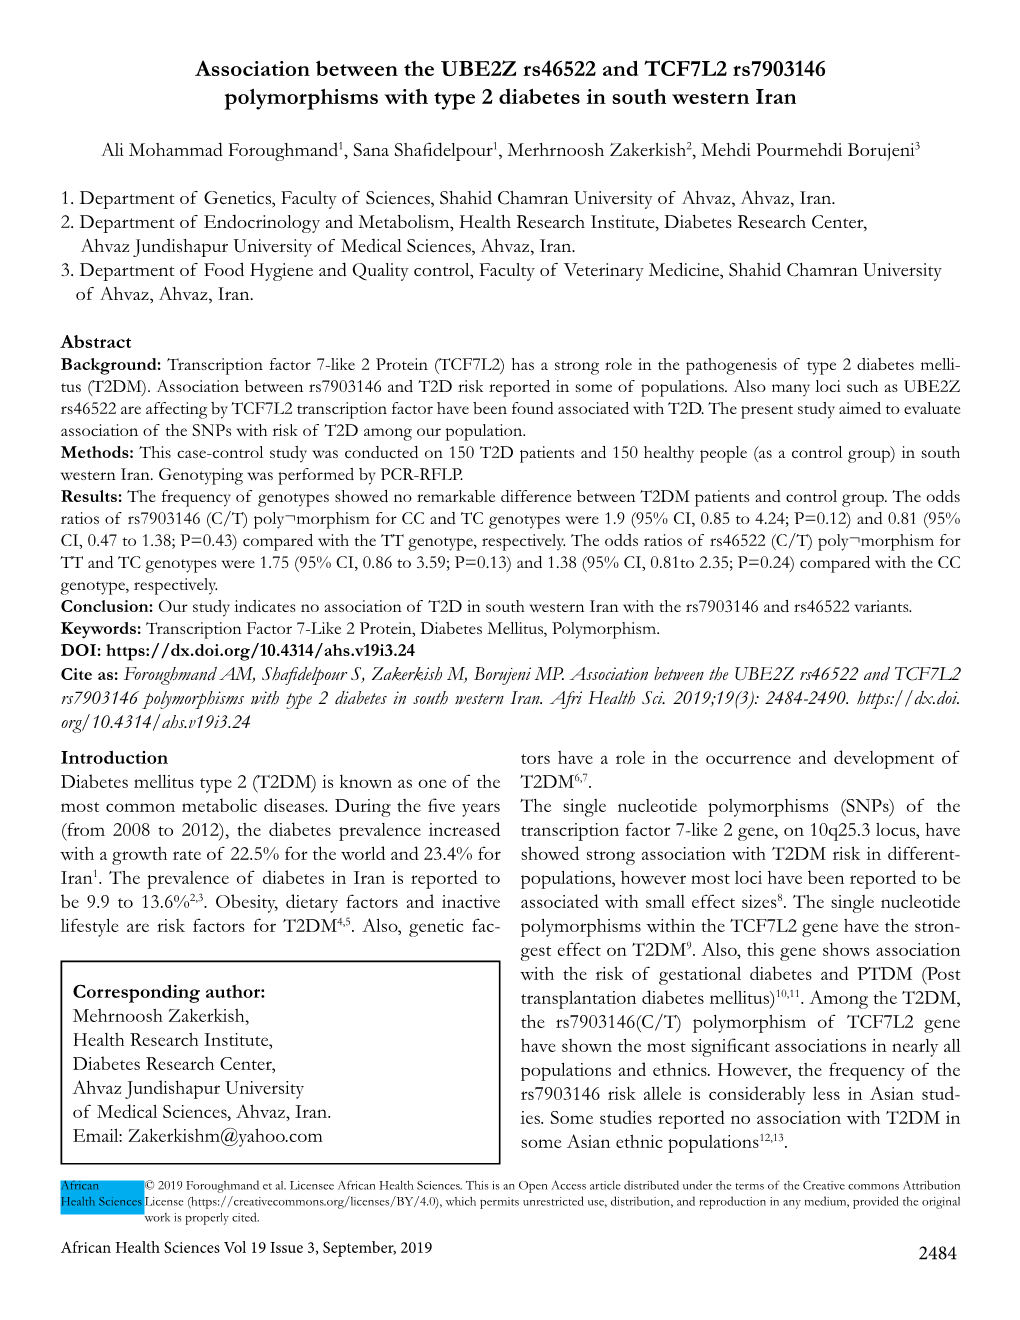 Association Between the UBE2Z Rs46522 and TCF7L2 Rs7903146 Polymorphisms with Type 2 Diabetes in South Western Iran